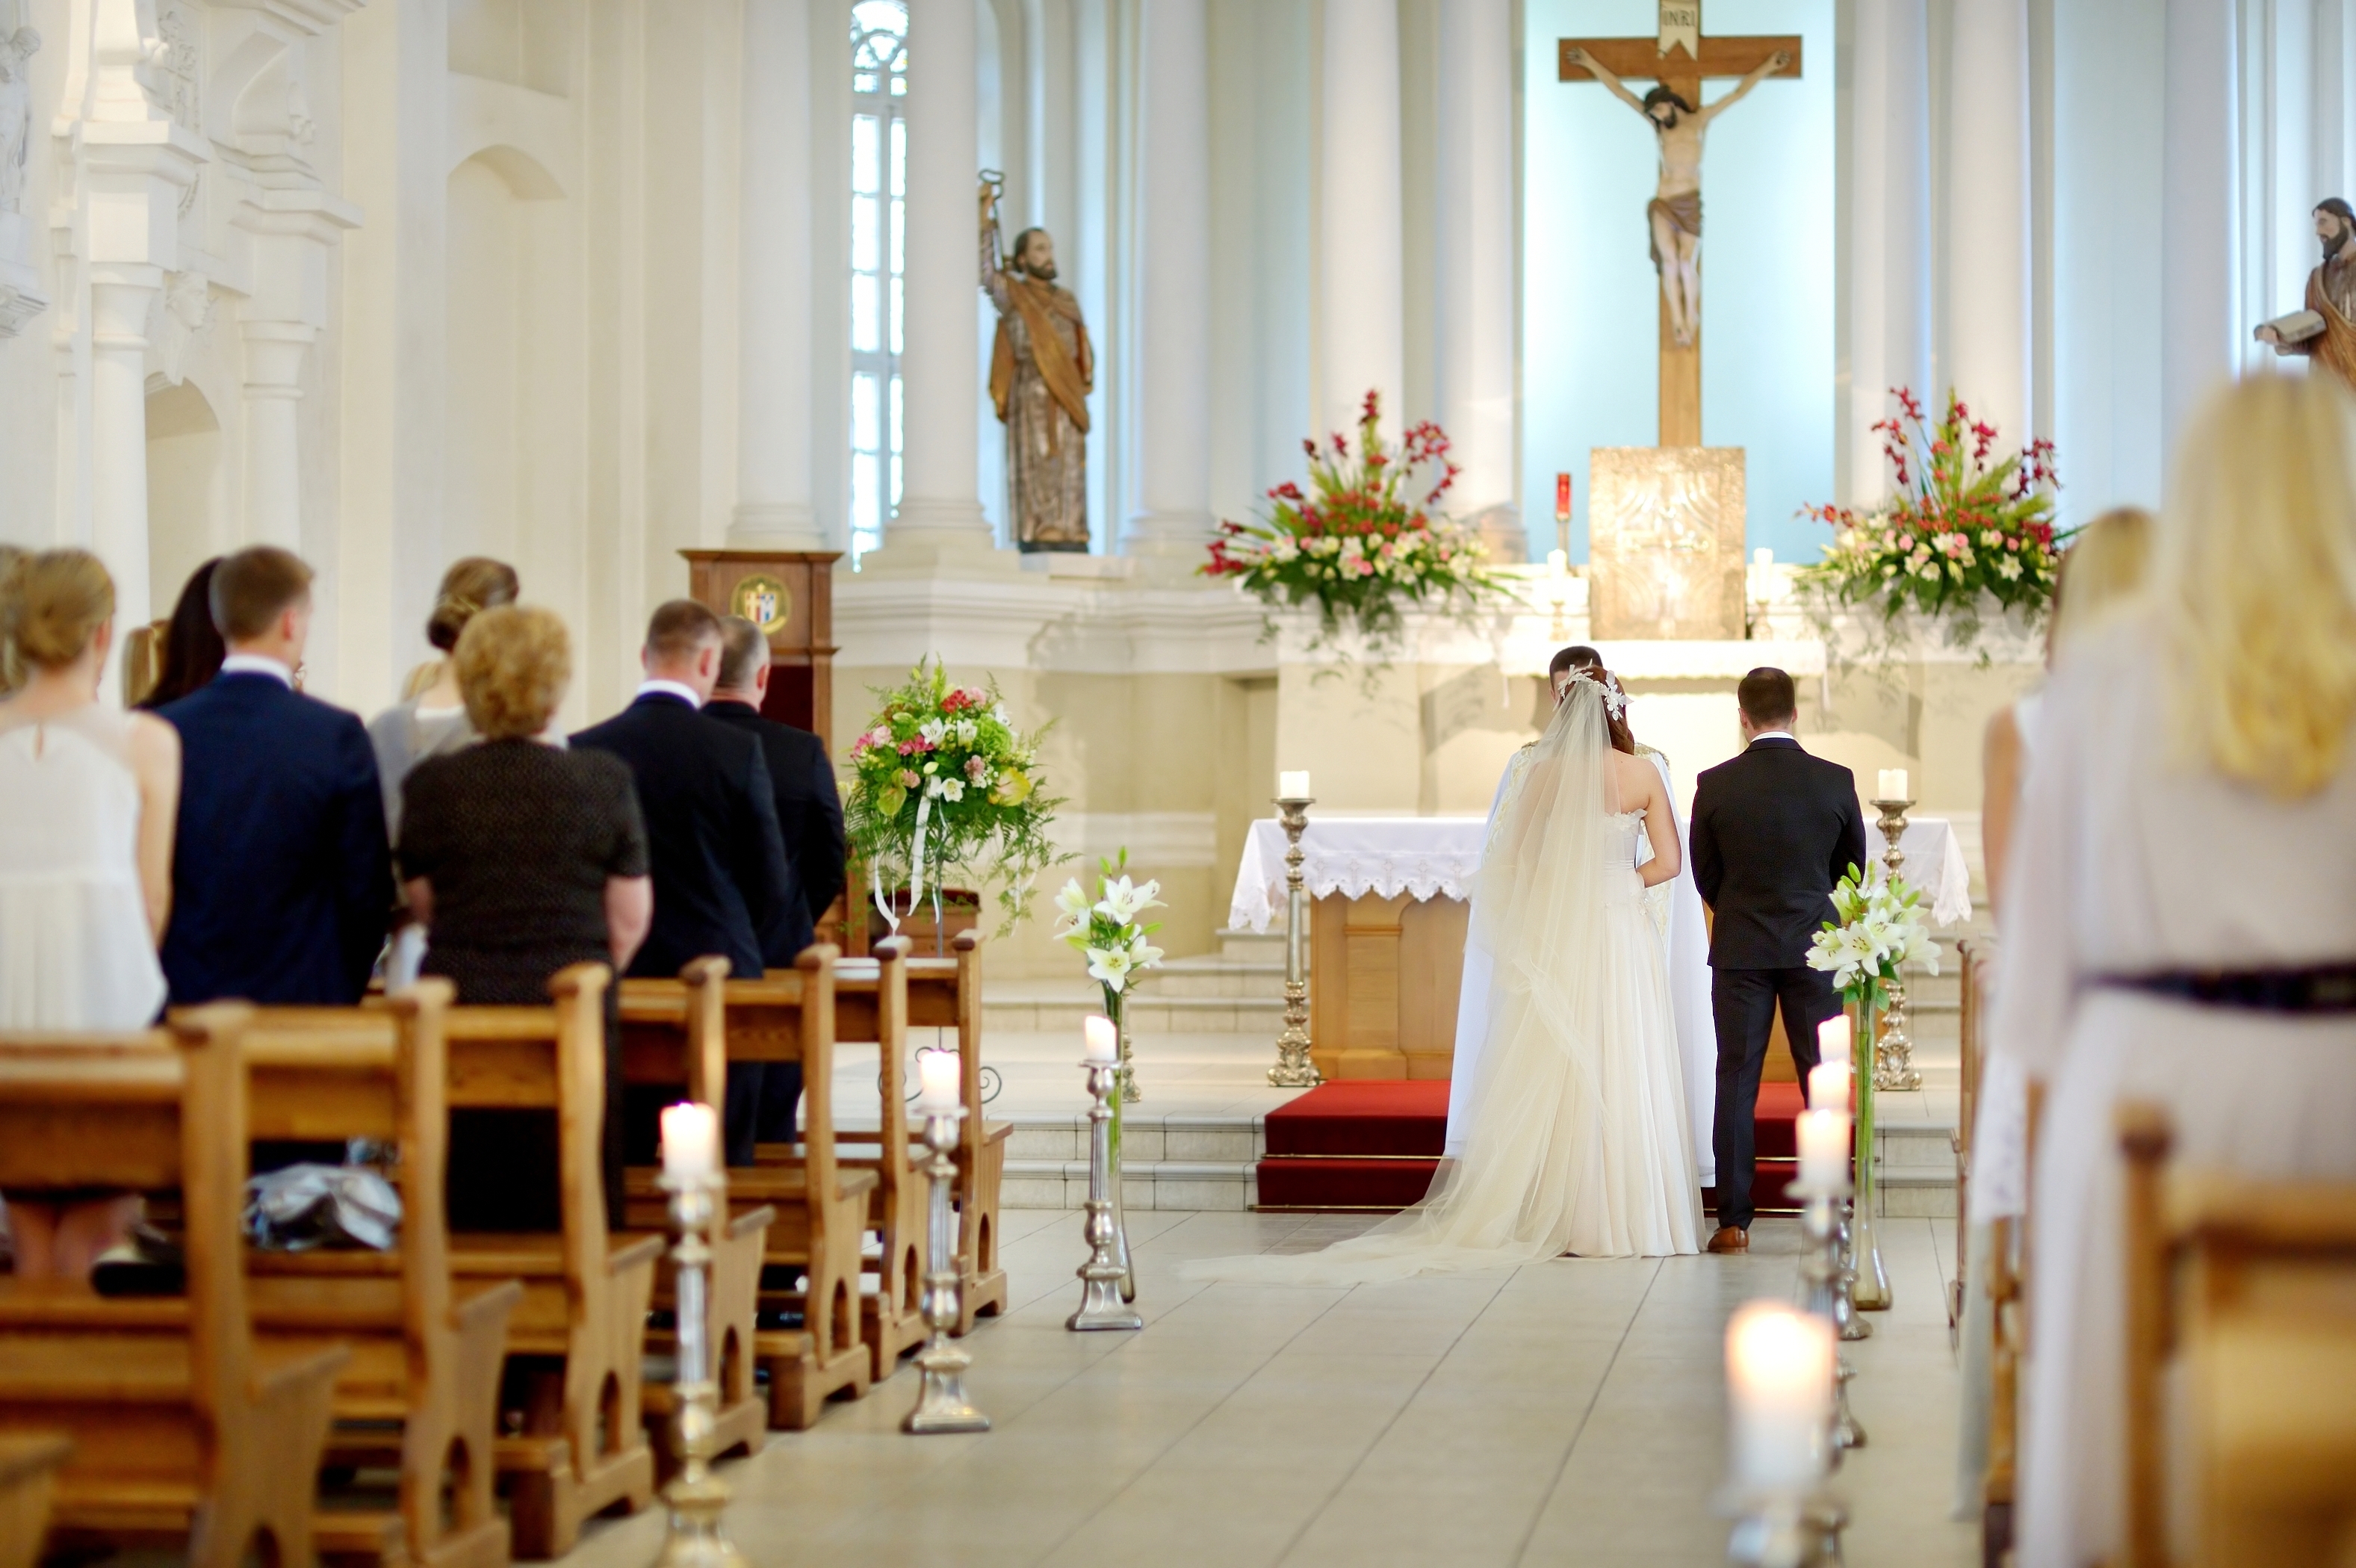 Bride and groom at the church during a wedding ceremony. | Source: Shutterstock